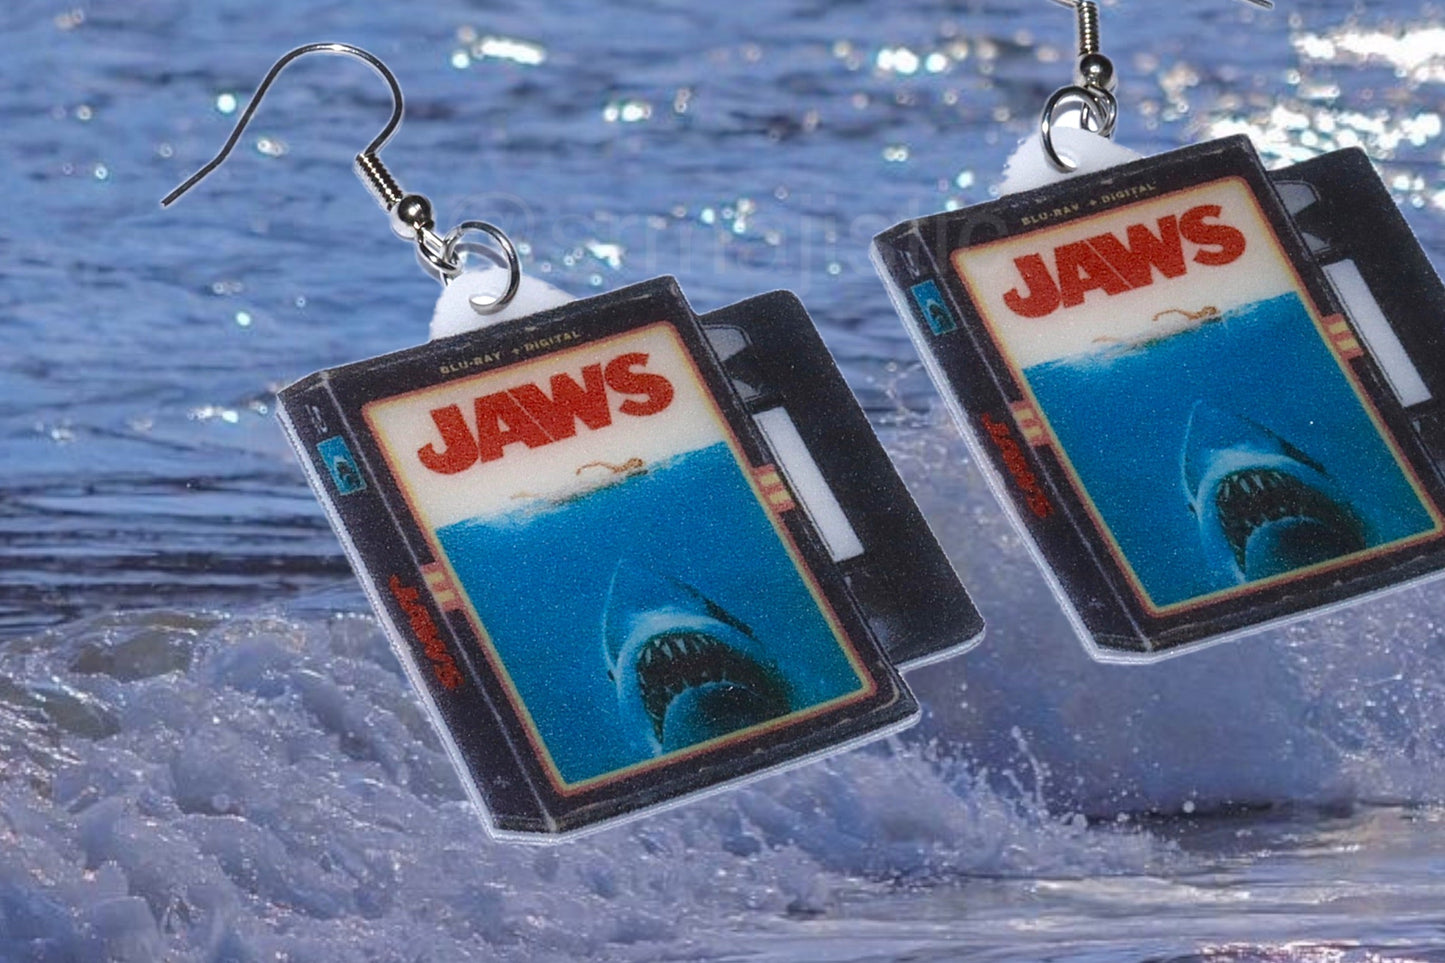 (READY TO SHIP) Jaws (1975) Movie VHS Tape 2D detailed Handmade Earrings!